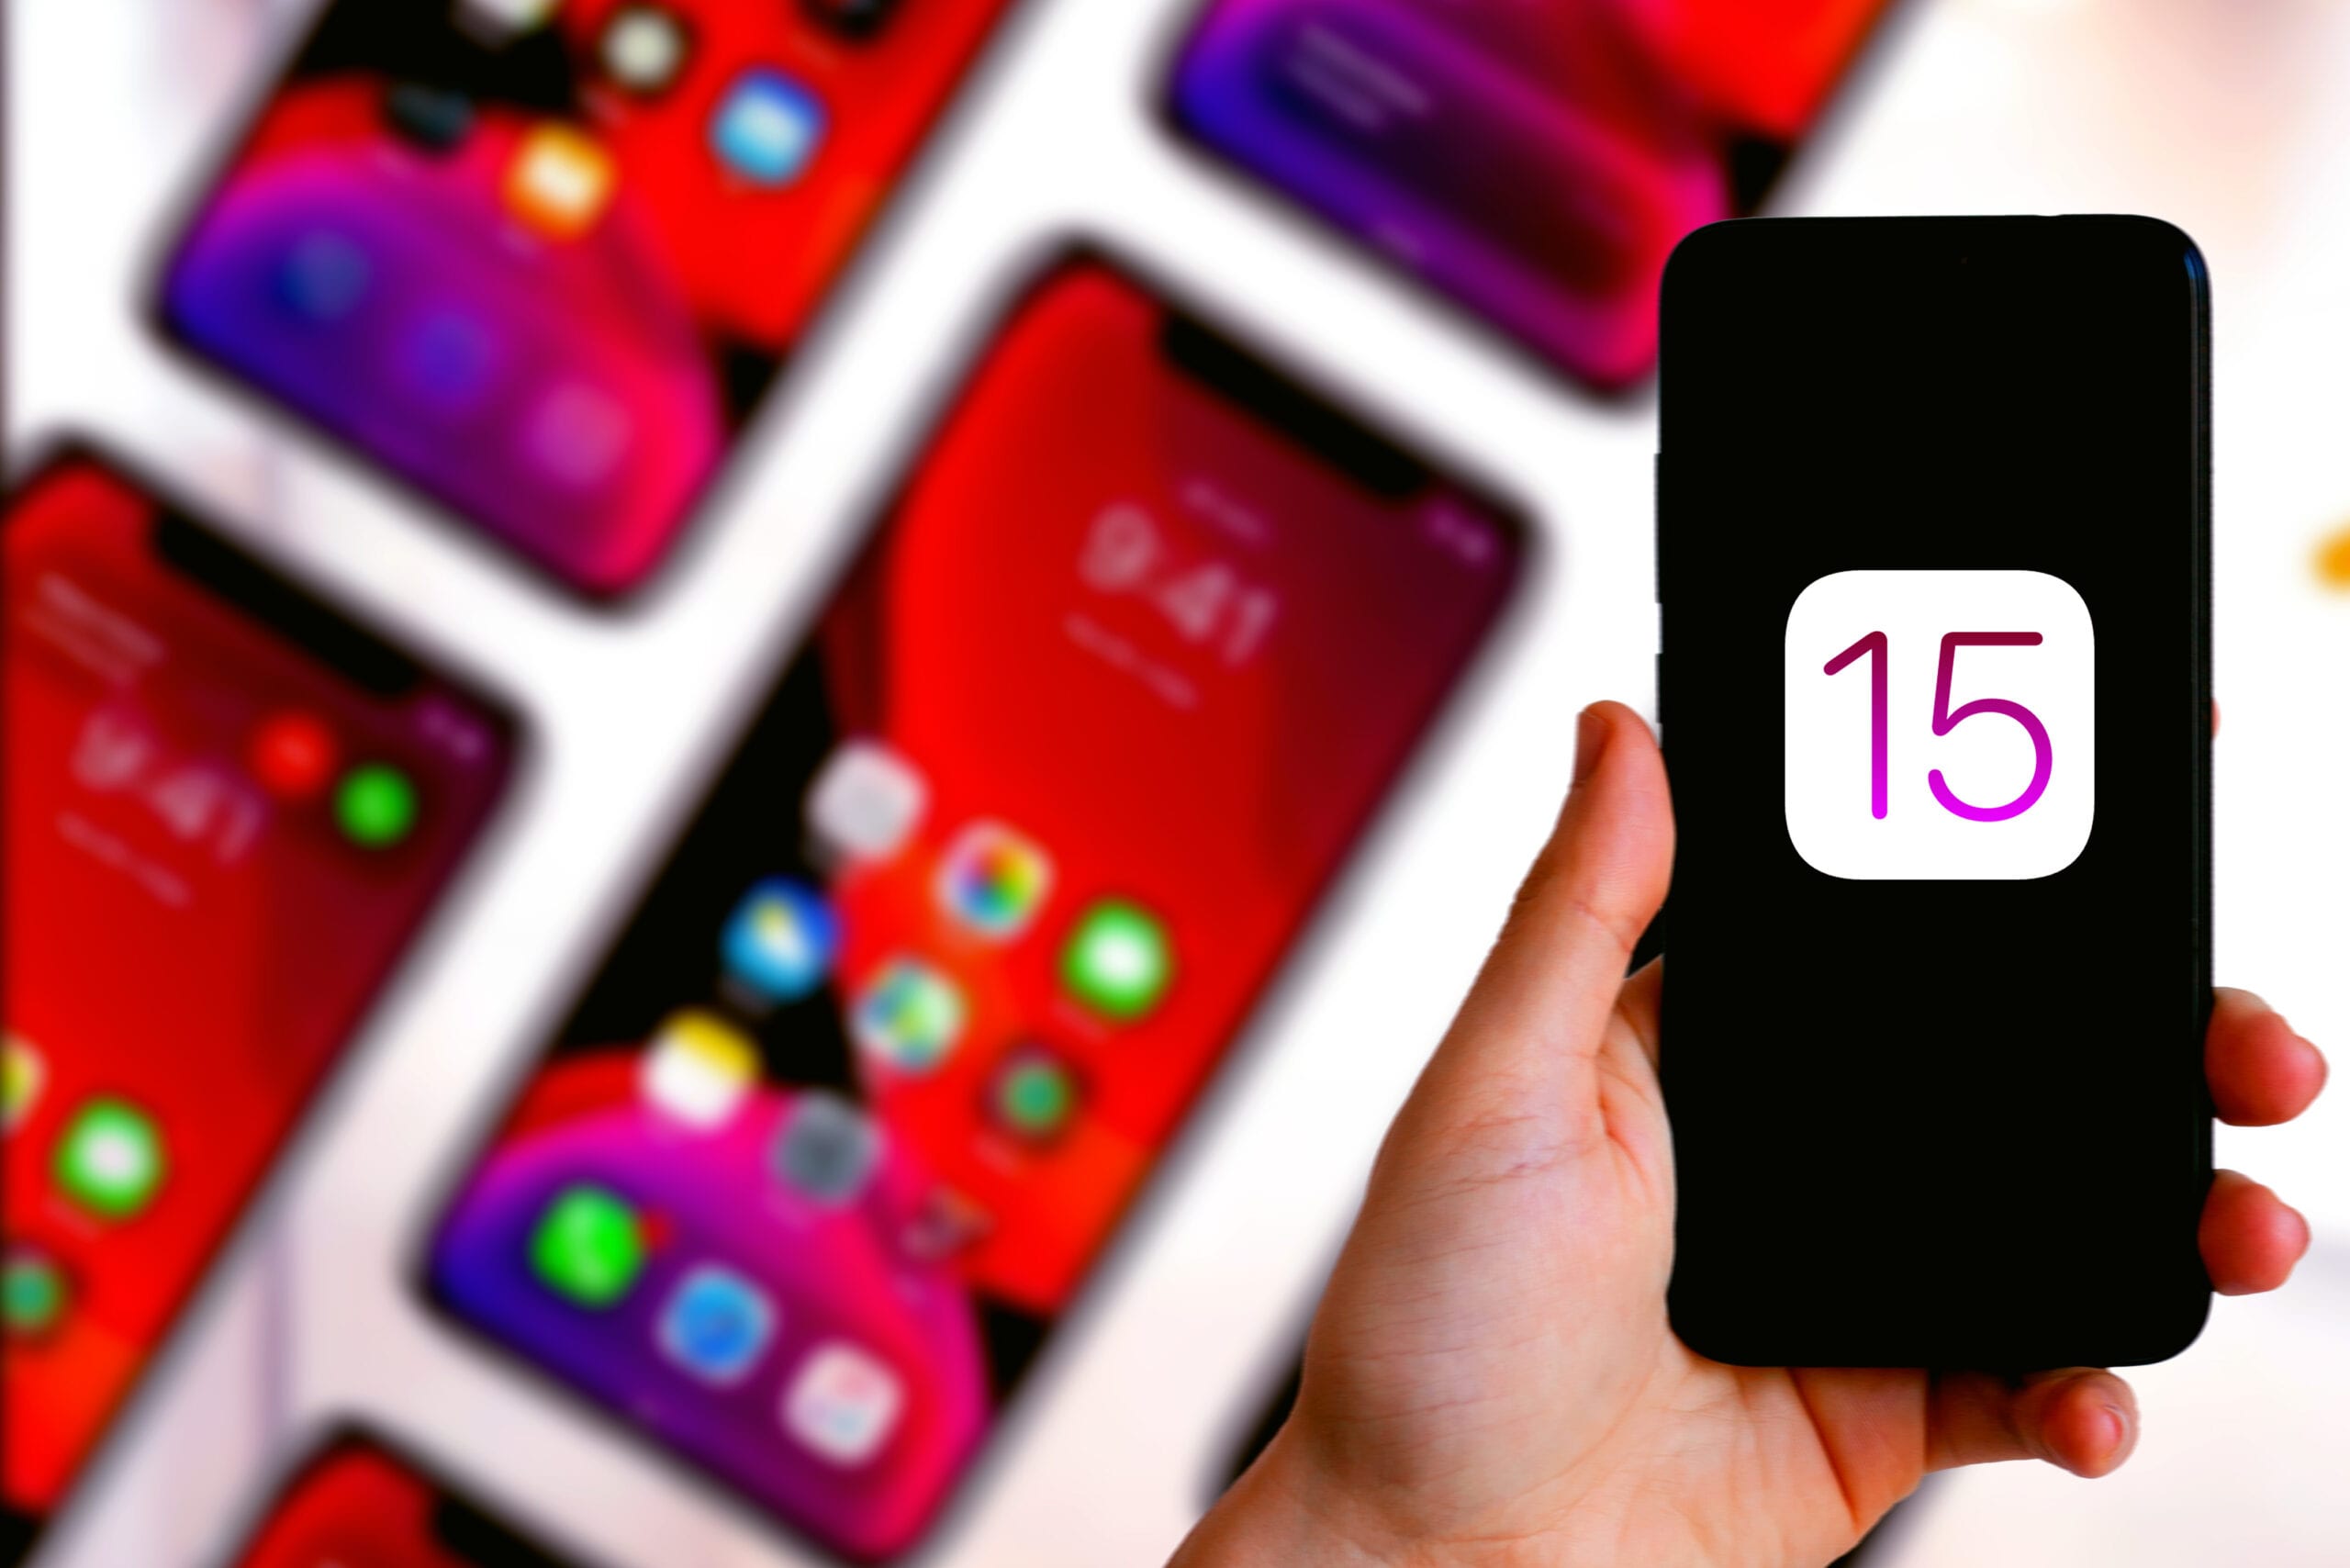 iOS 15: A New Wave for App Store Marketing